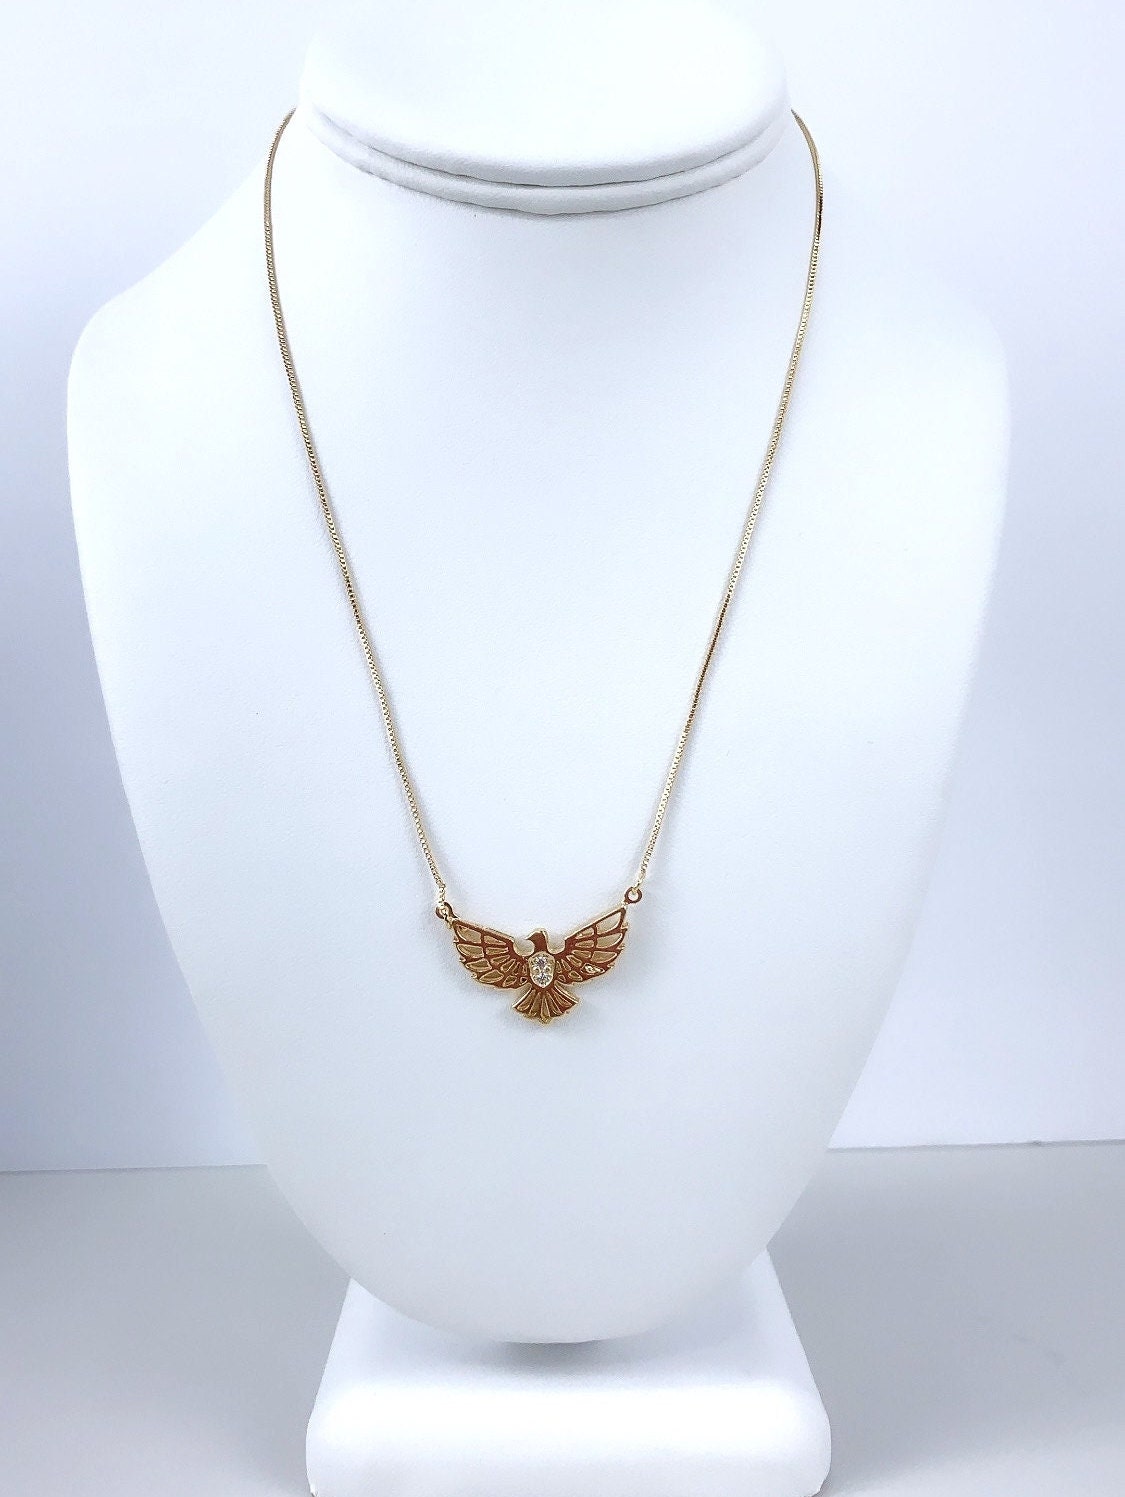 18k Gold Filled 1mm Box Chain Necklace, Peace Dove Charm Featuring Cubic Zirconia Wholesale Jewelry Supplies